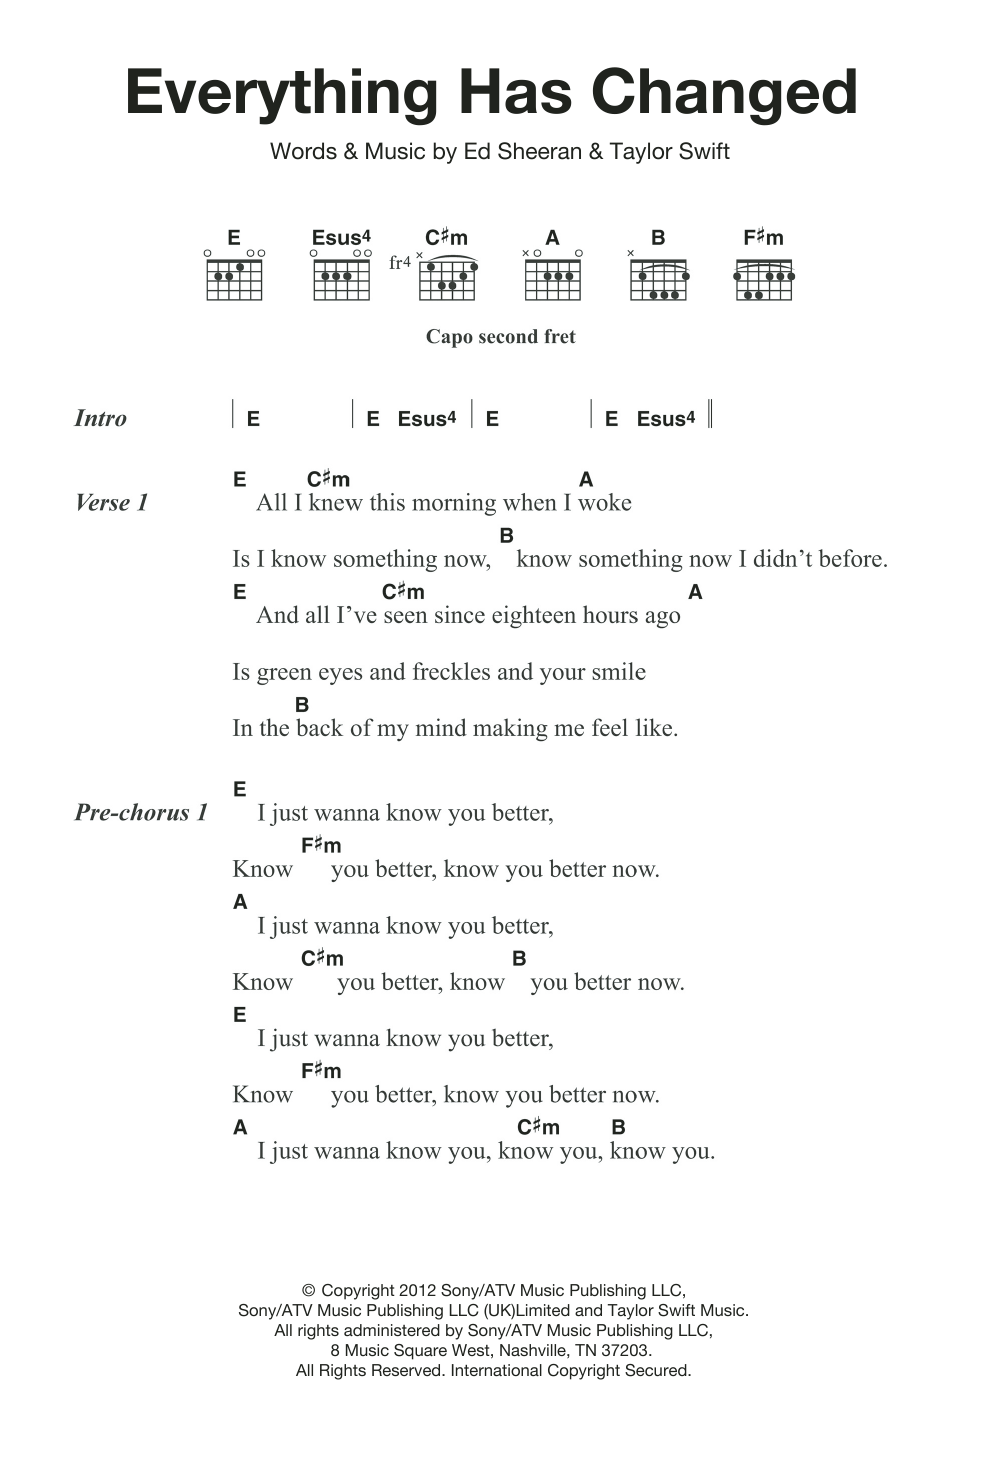 Taylor Swift Everything Has Changed (feat. Ed Sheeran) sheet music notes and chords. Download Printable PDF.